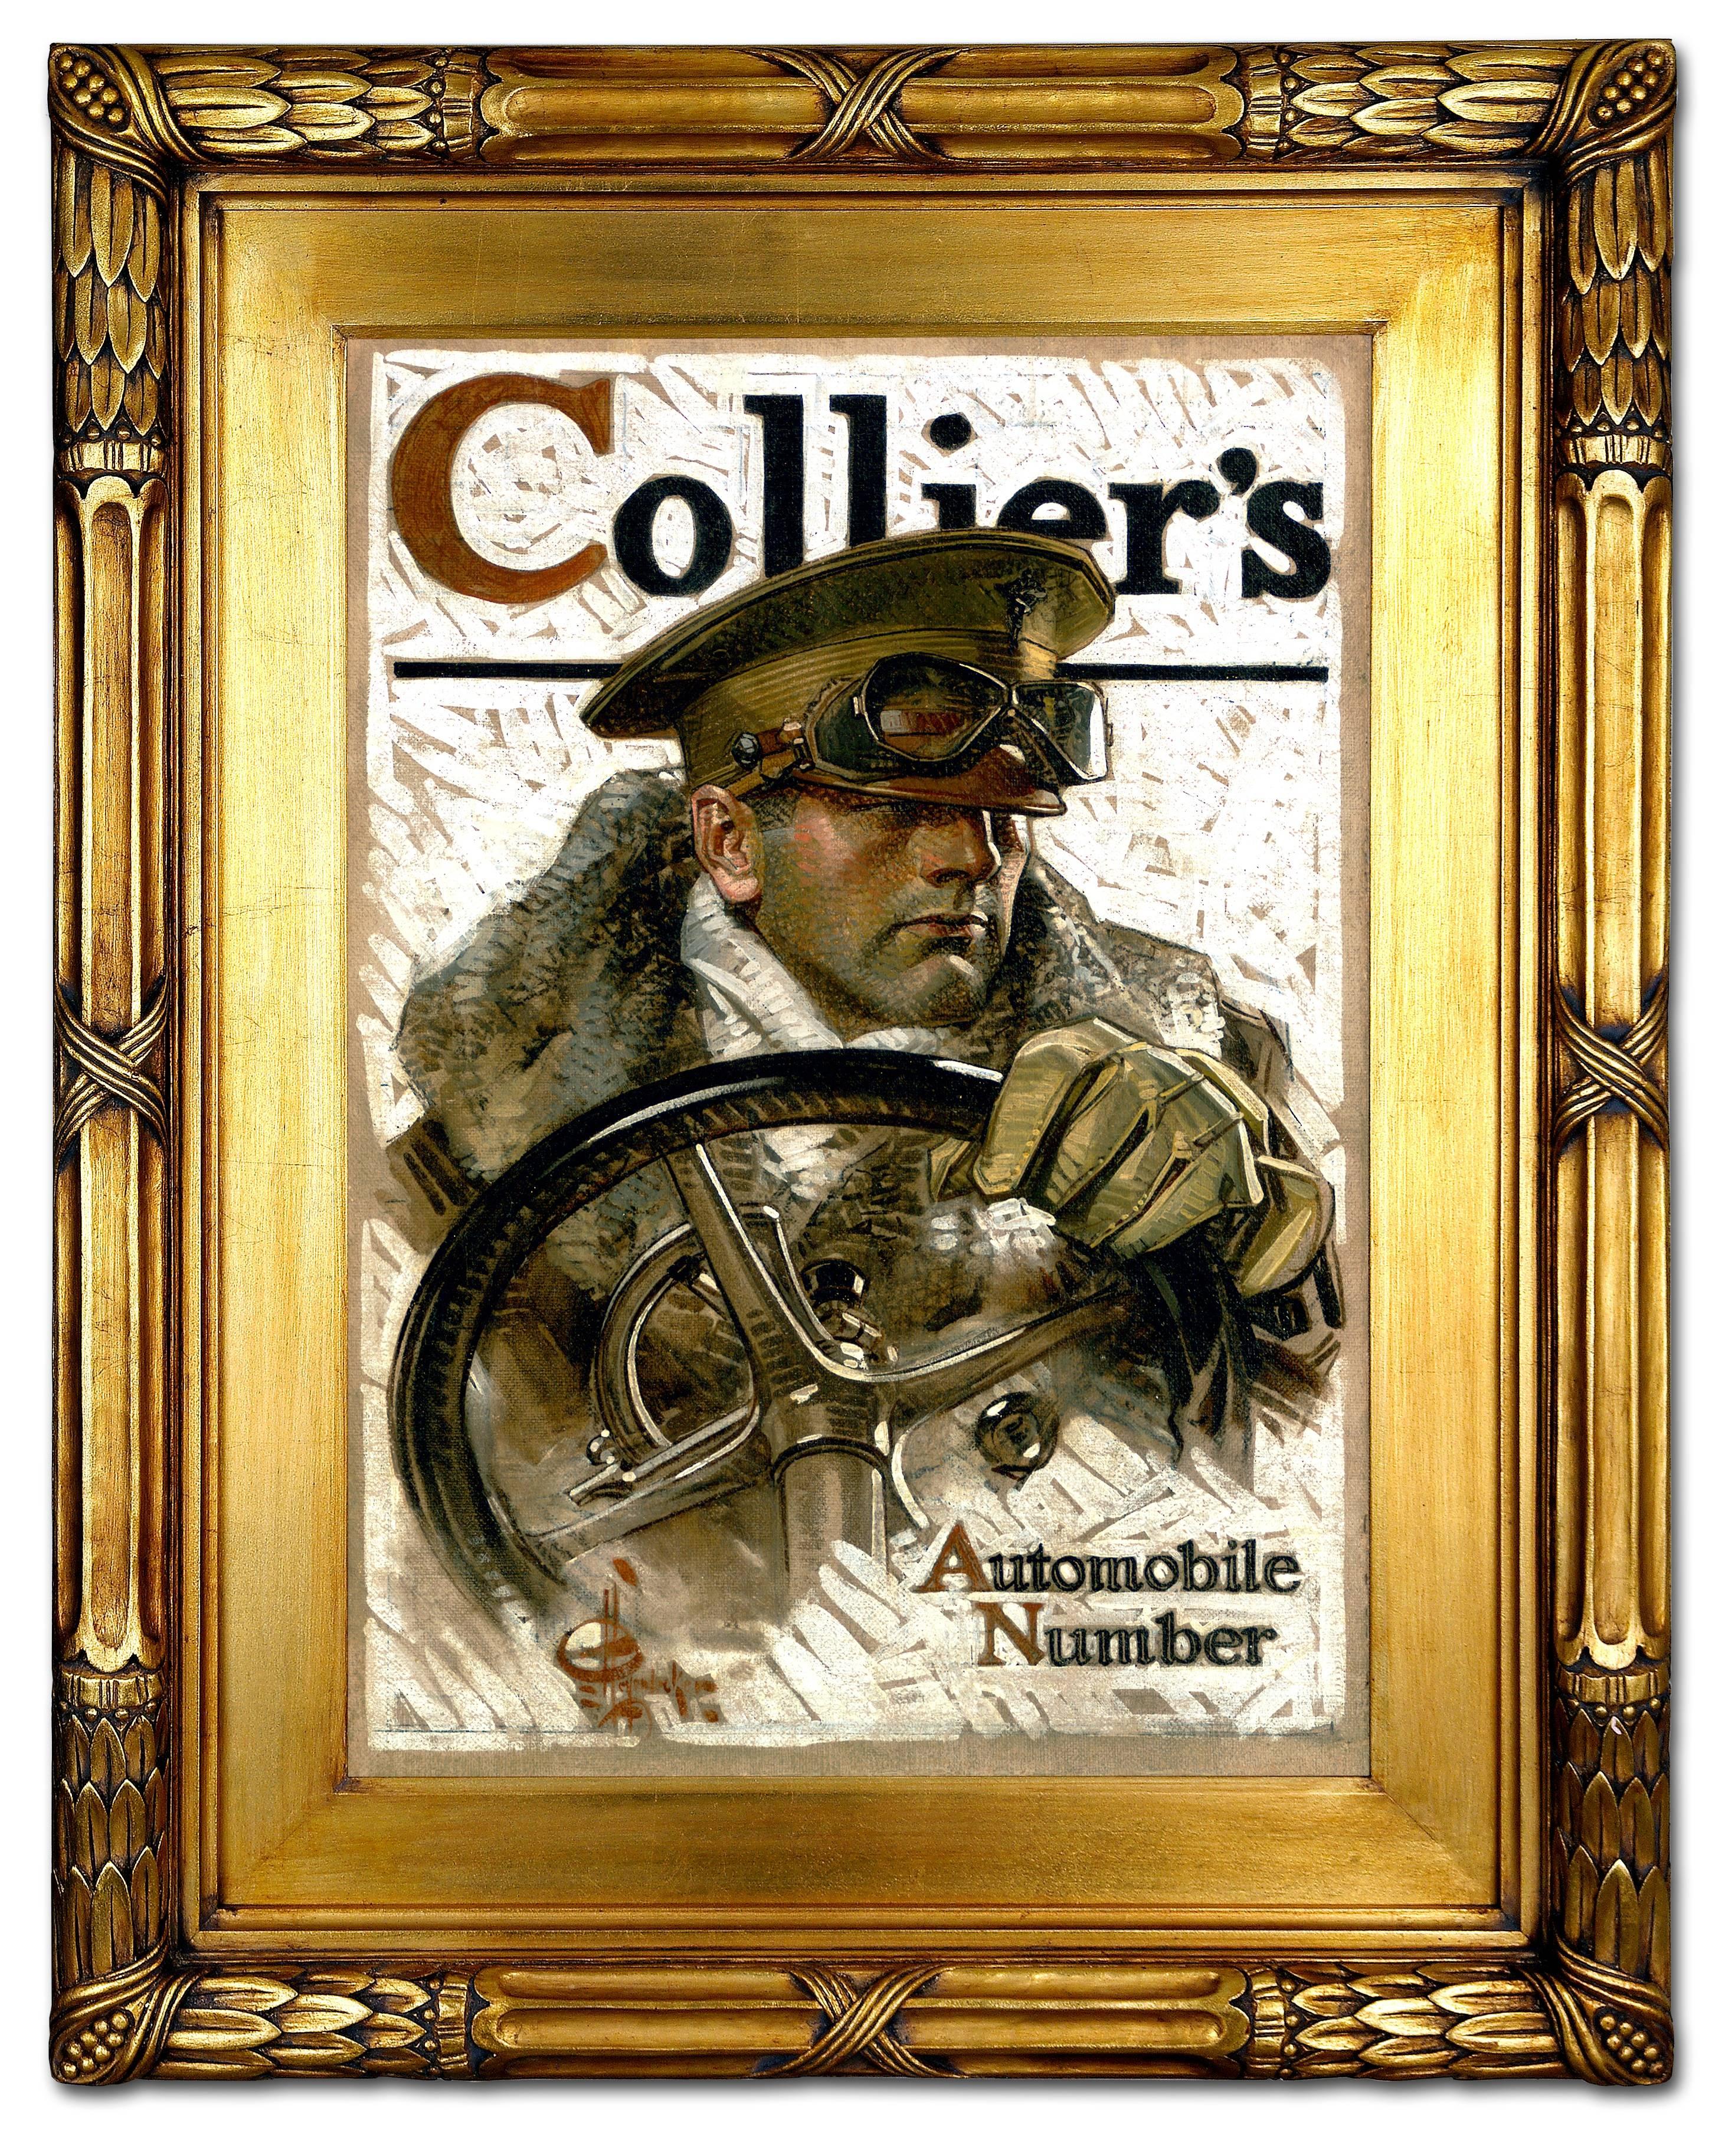 Automobile Number, Collier's Magazine Cover - Painting by Joseph Christian Leyendecker